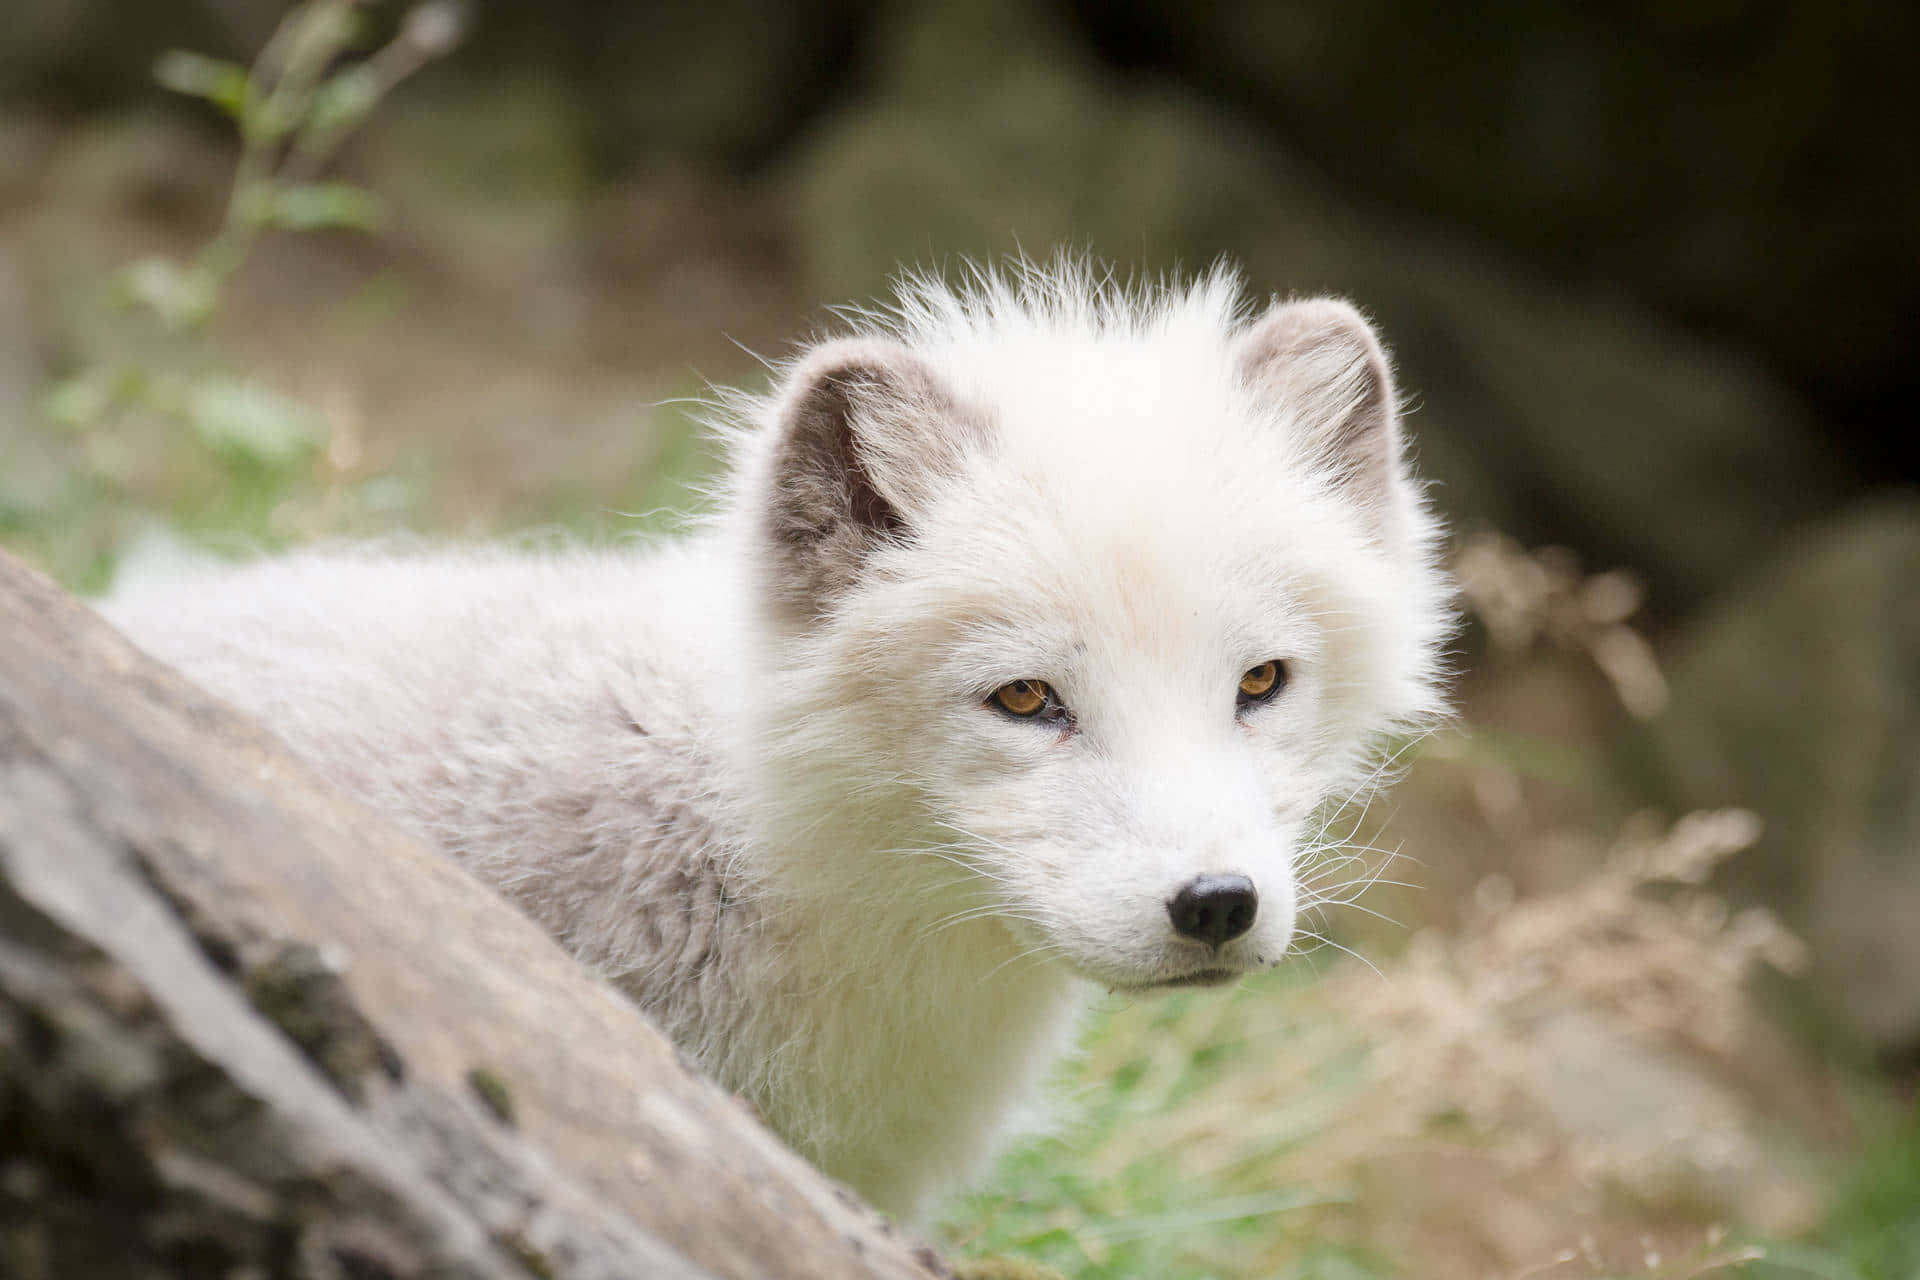 "The beautiful Arctic landscape, home to the Arctic Fox."